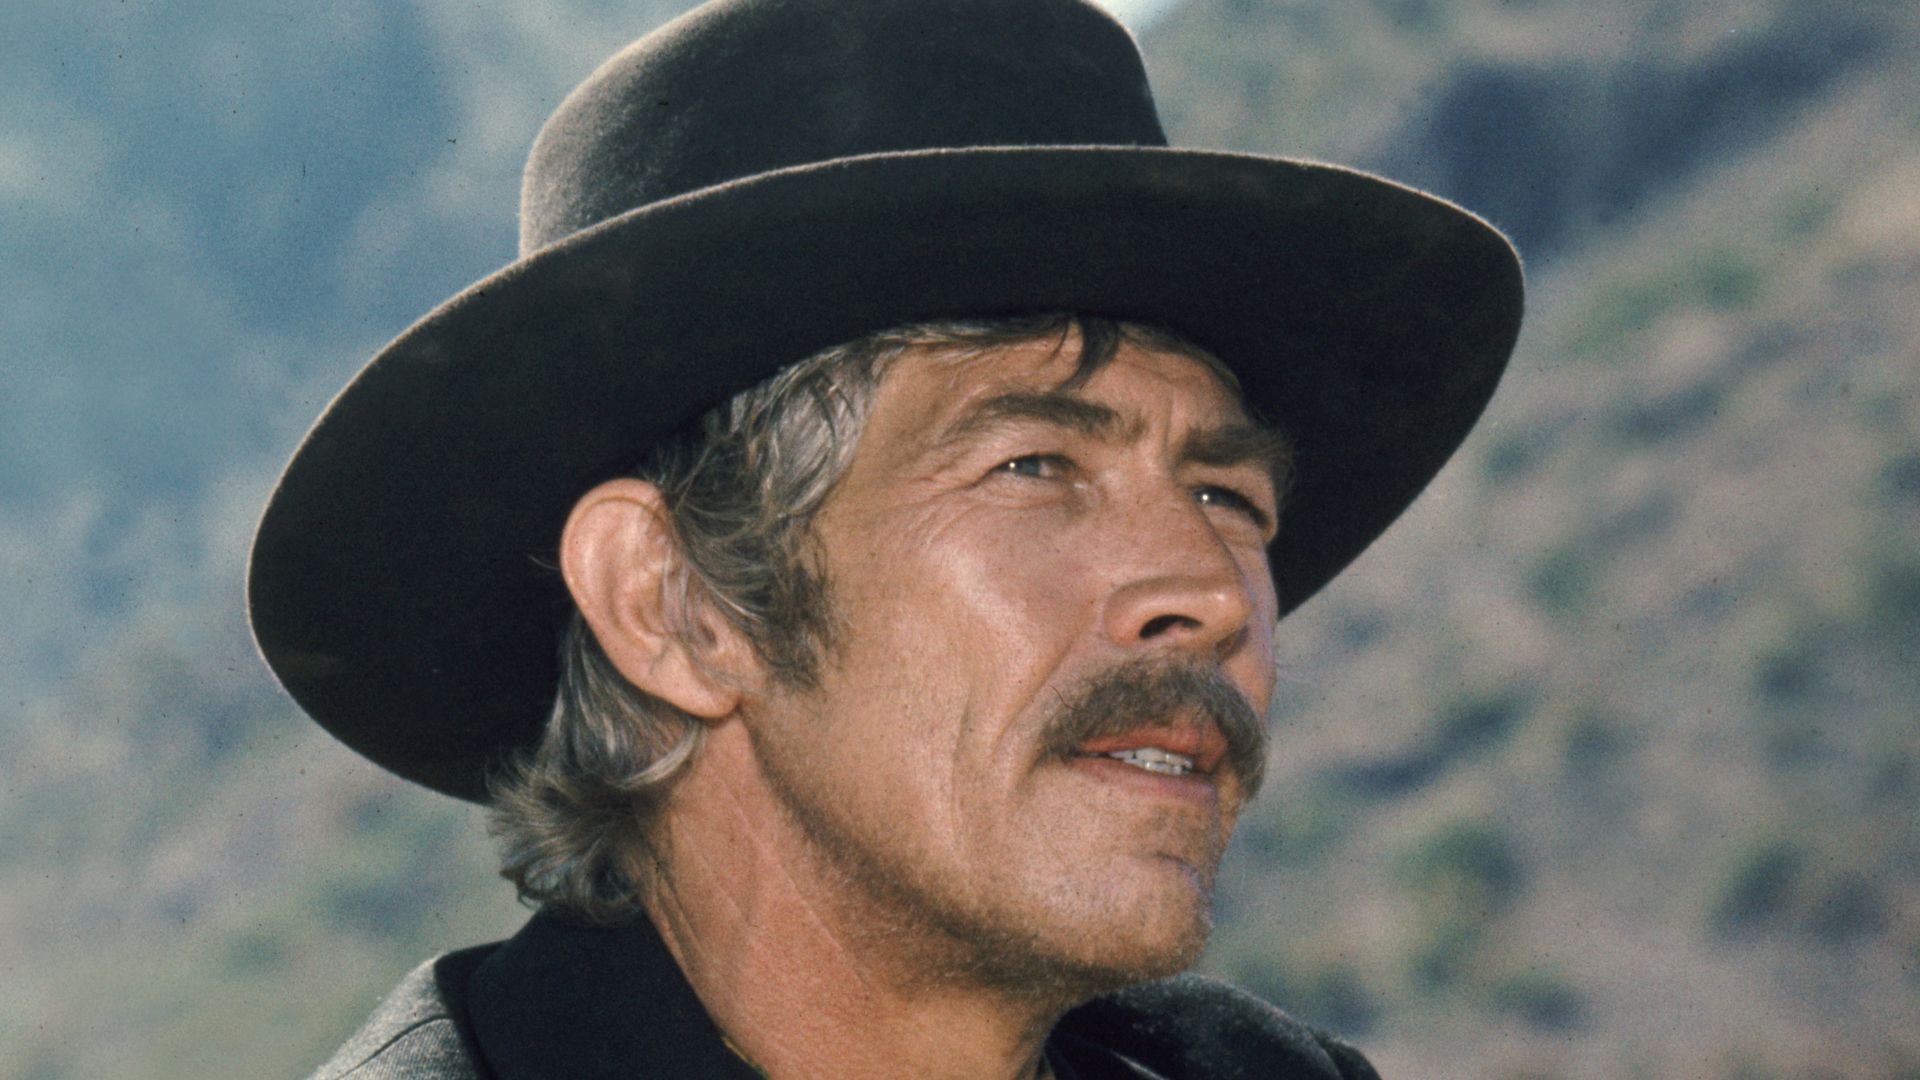 James Coburn - An American Film And Television Actor